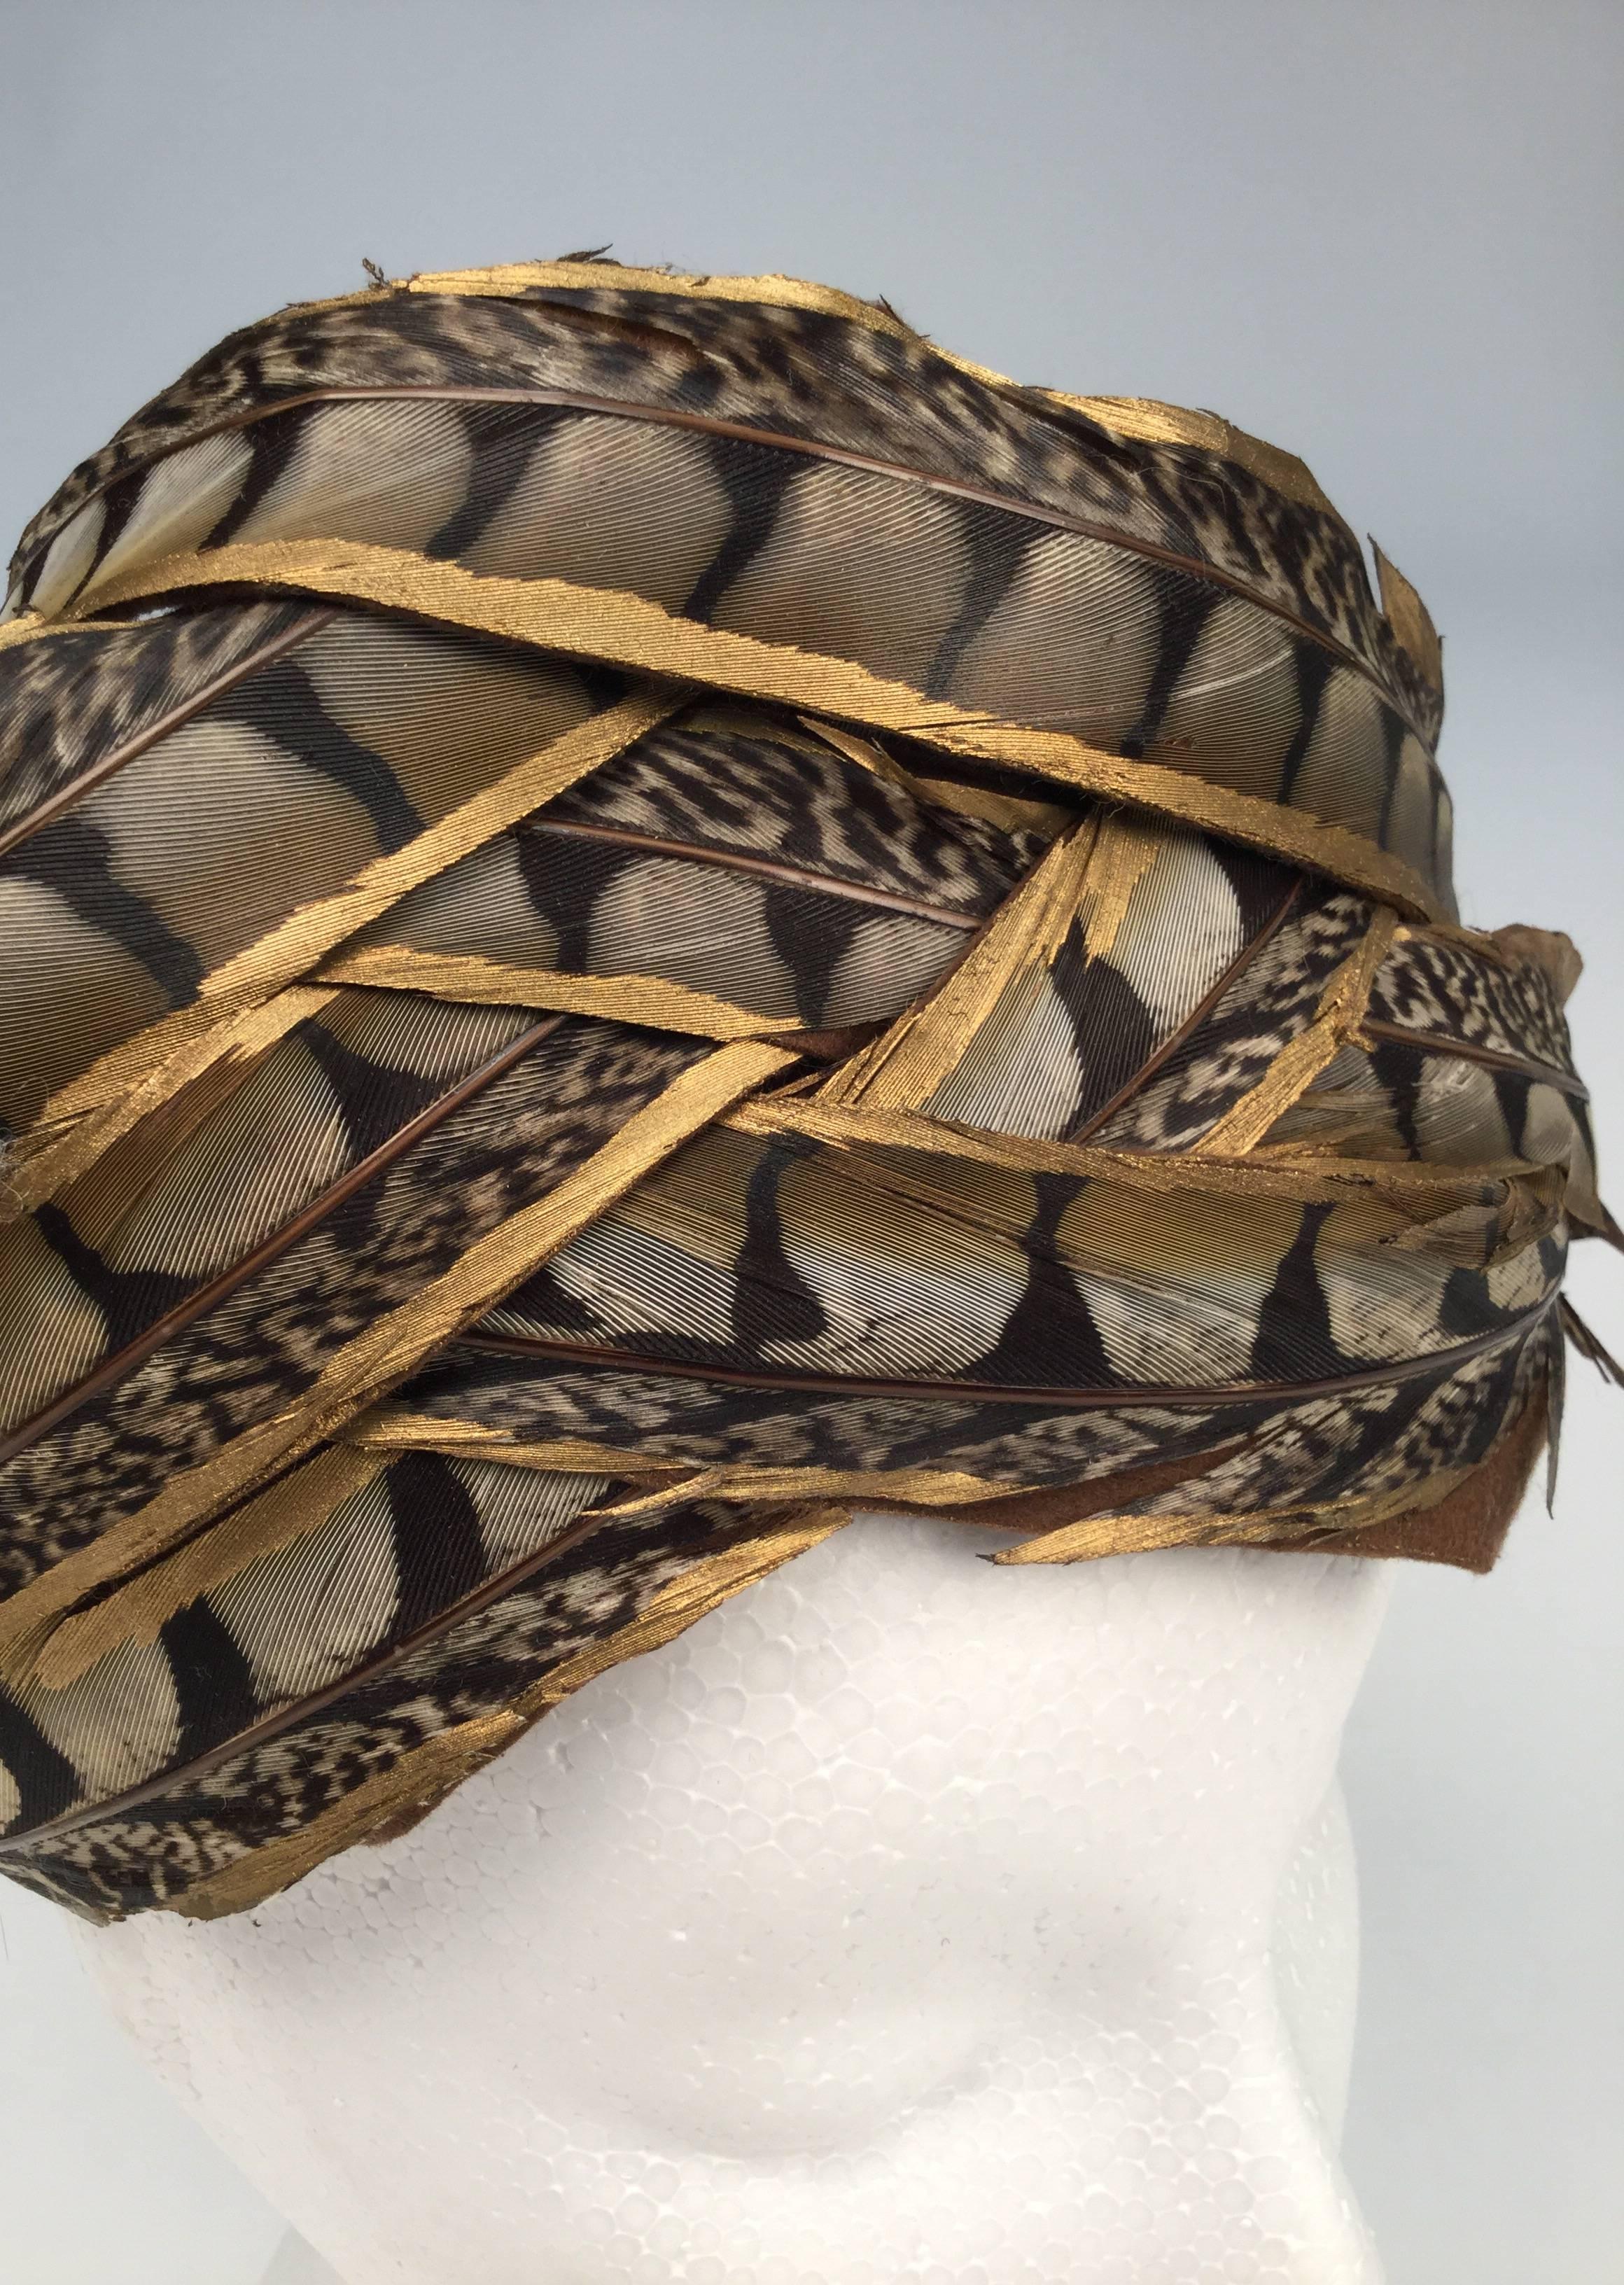 Remarkable 1960's Christian Dior pheasant feather chapeaux. 
Feathers are hand painted with and dipped into gold paint.   Feathers are, woven into and wrapped around, the hat in a turban style.  Feathers beautifully placed atop a brown mesh